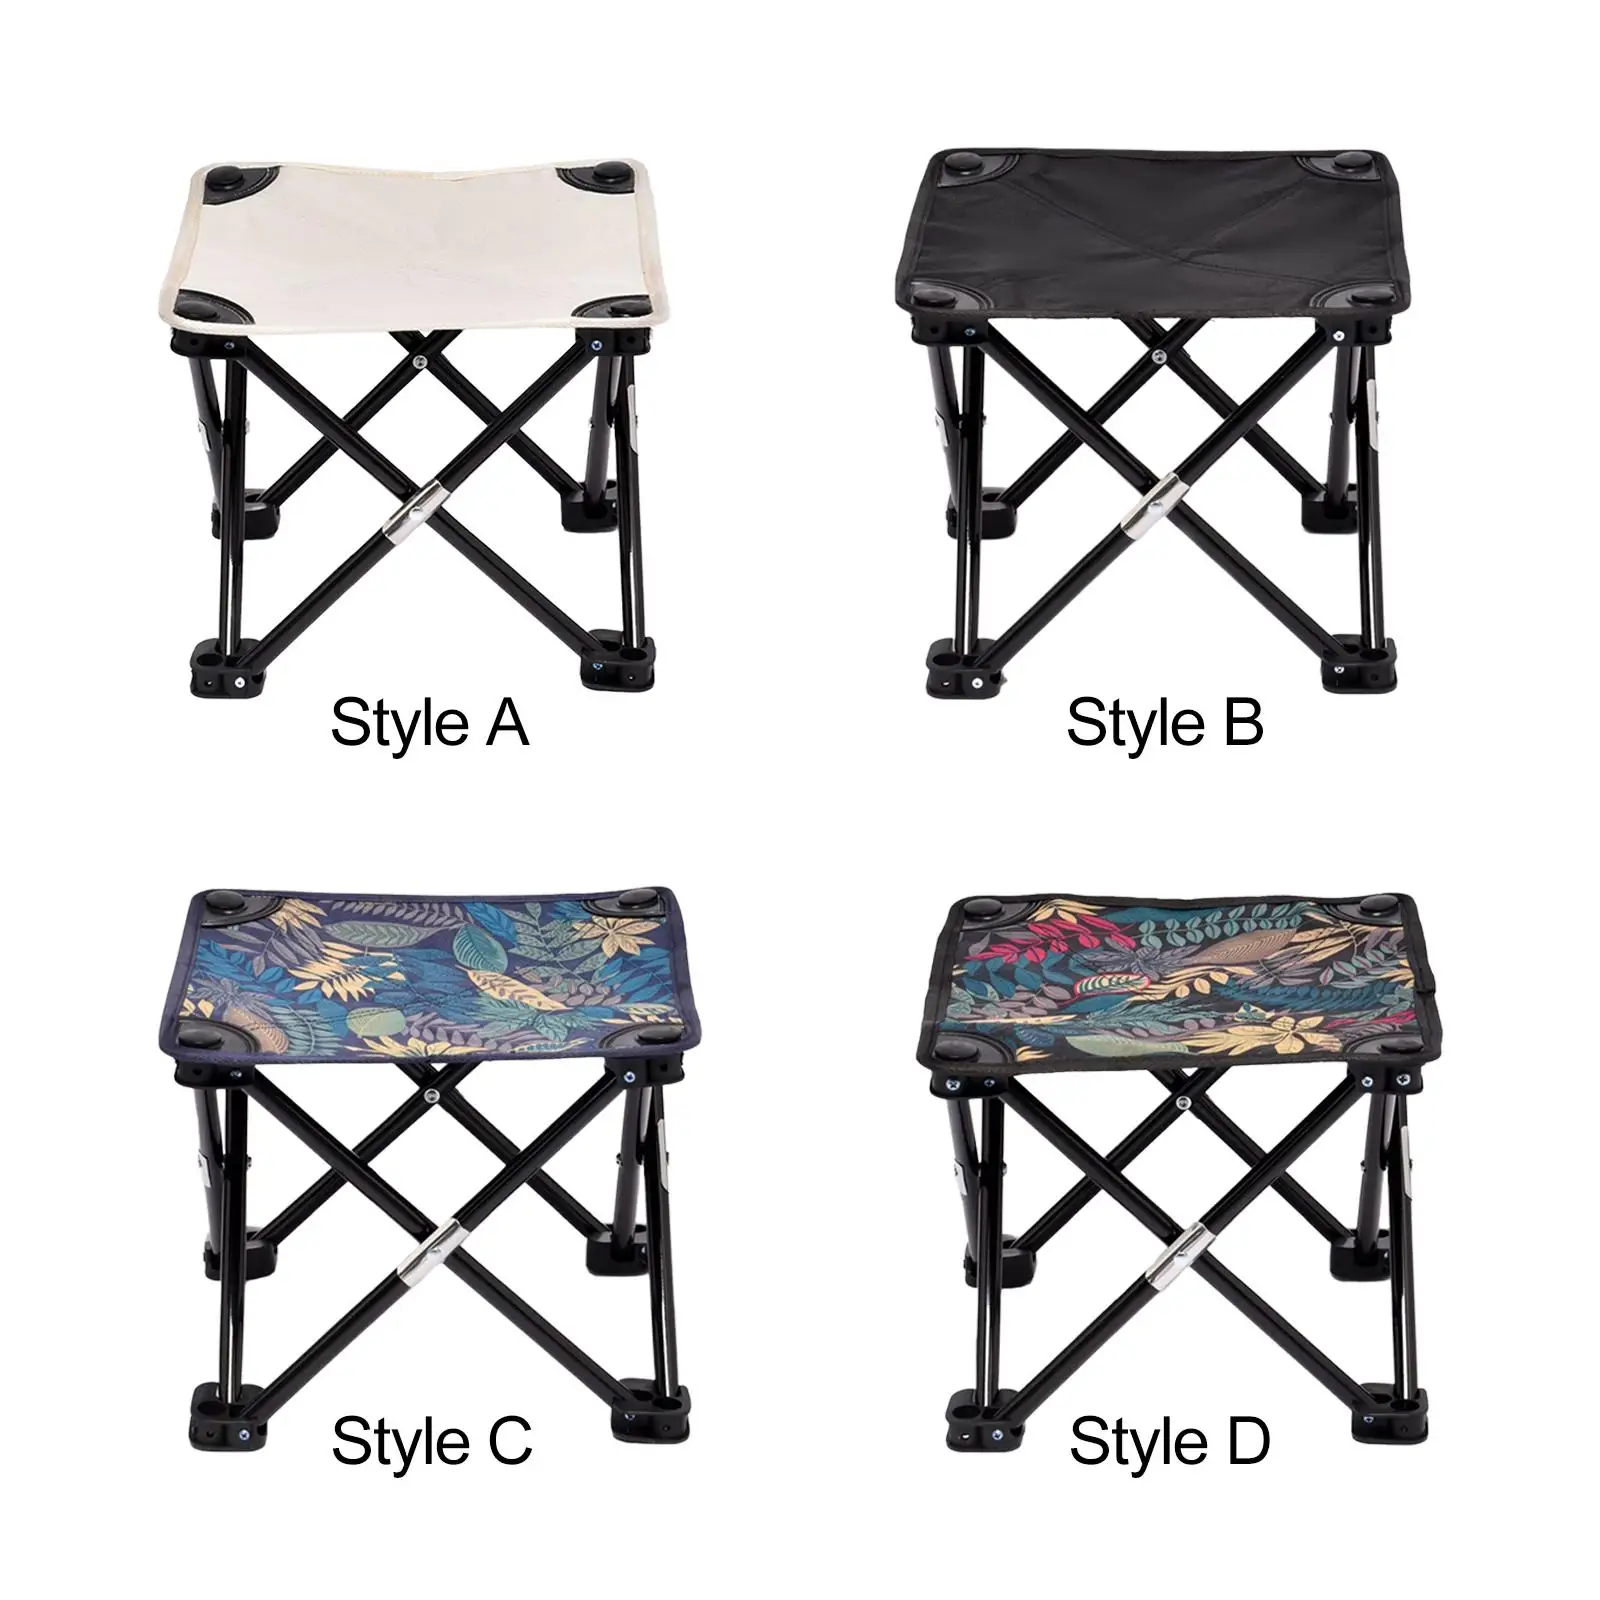 Folding Stool recliner Foot Rest under Desk Footstool Lounger Chair Ottoman Seat Fishing Chairs for Walking Hiking Picnic Travel